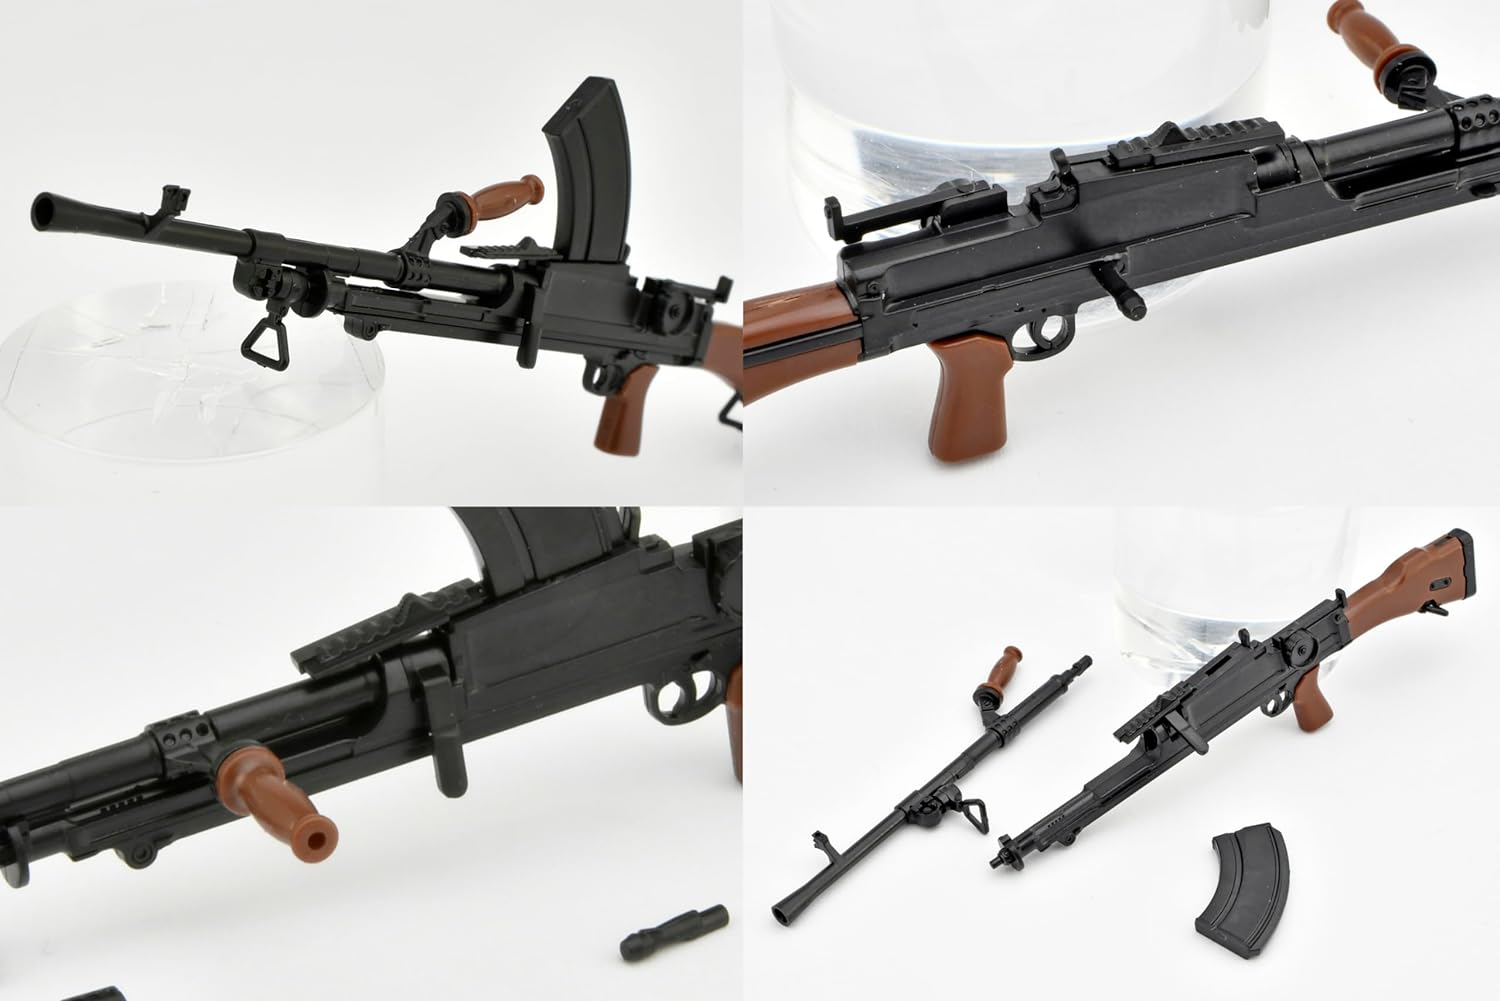 Tomytec Little Armory x Strike Witches LASW04 "Strike Witches ROAD to BERLIN" Blen Light Machine Gun Mk.1 Plastic Model